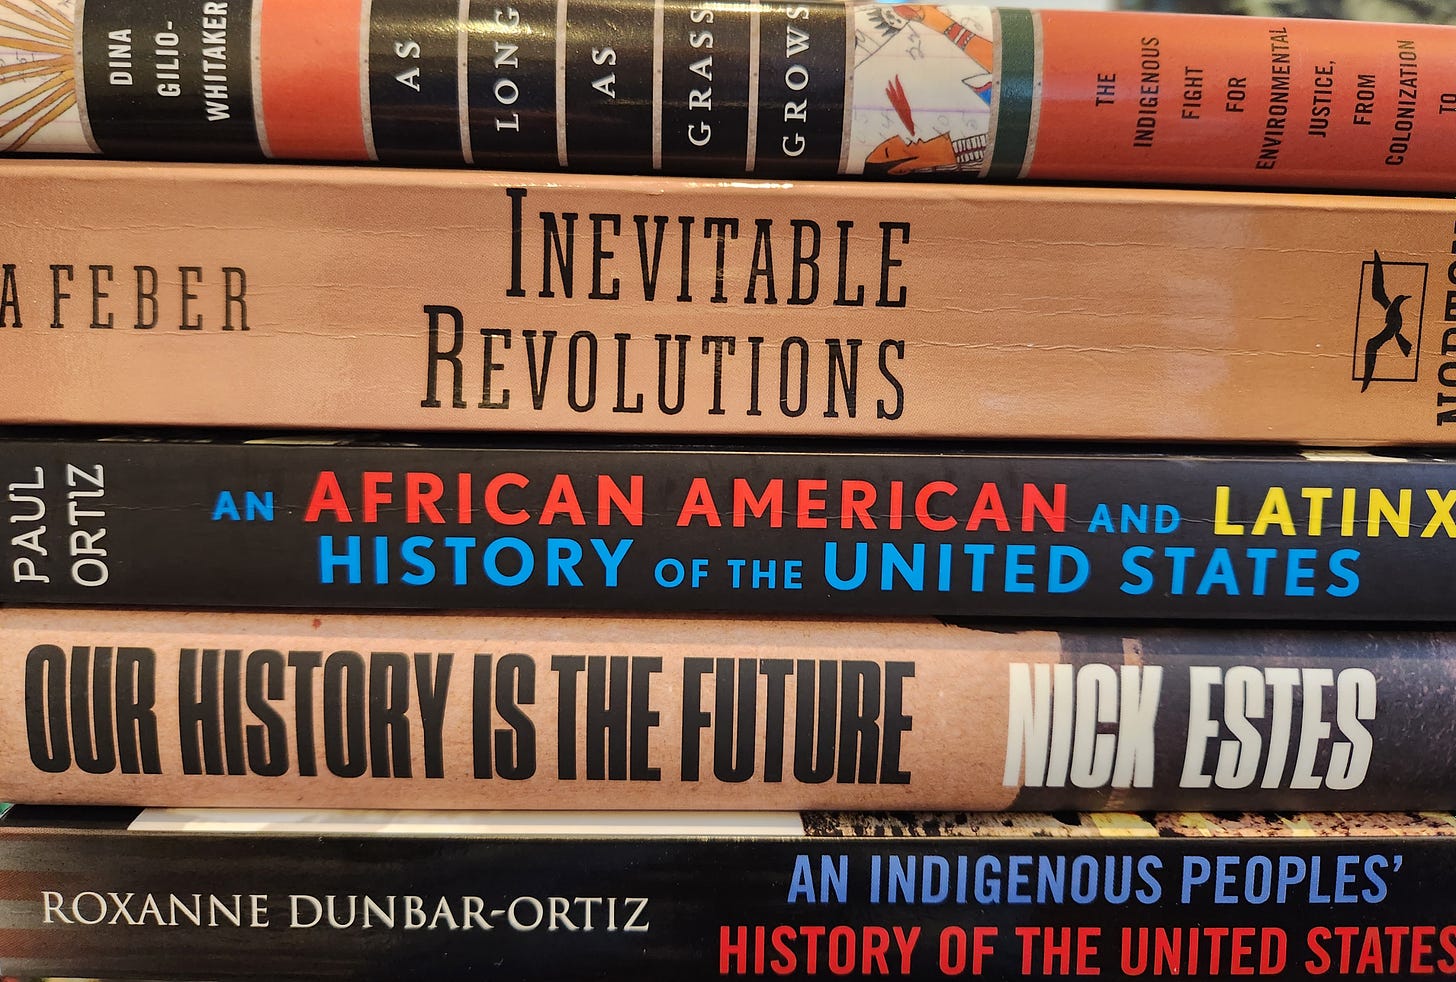 stack of books about Indigenous history, African American history, and US foreign policy